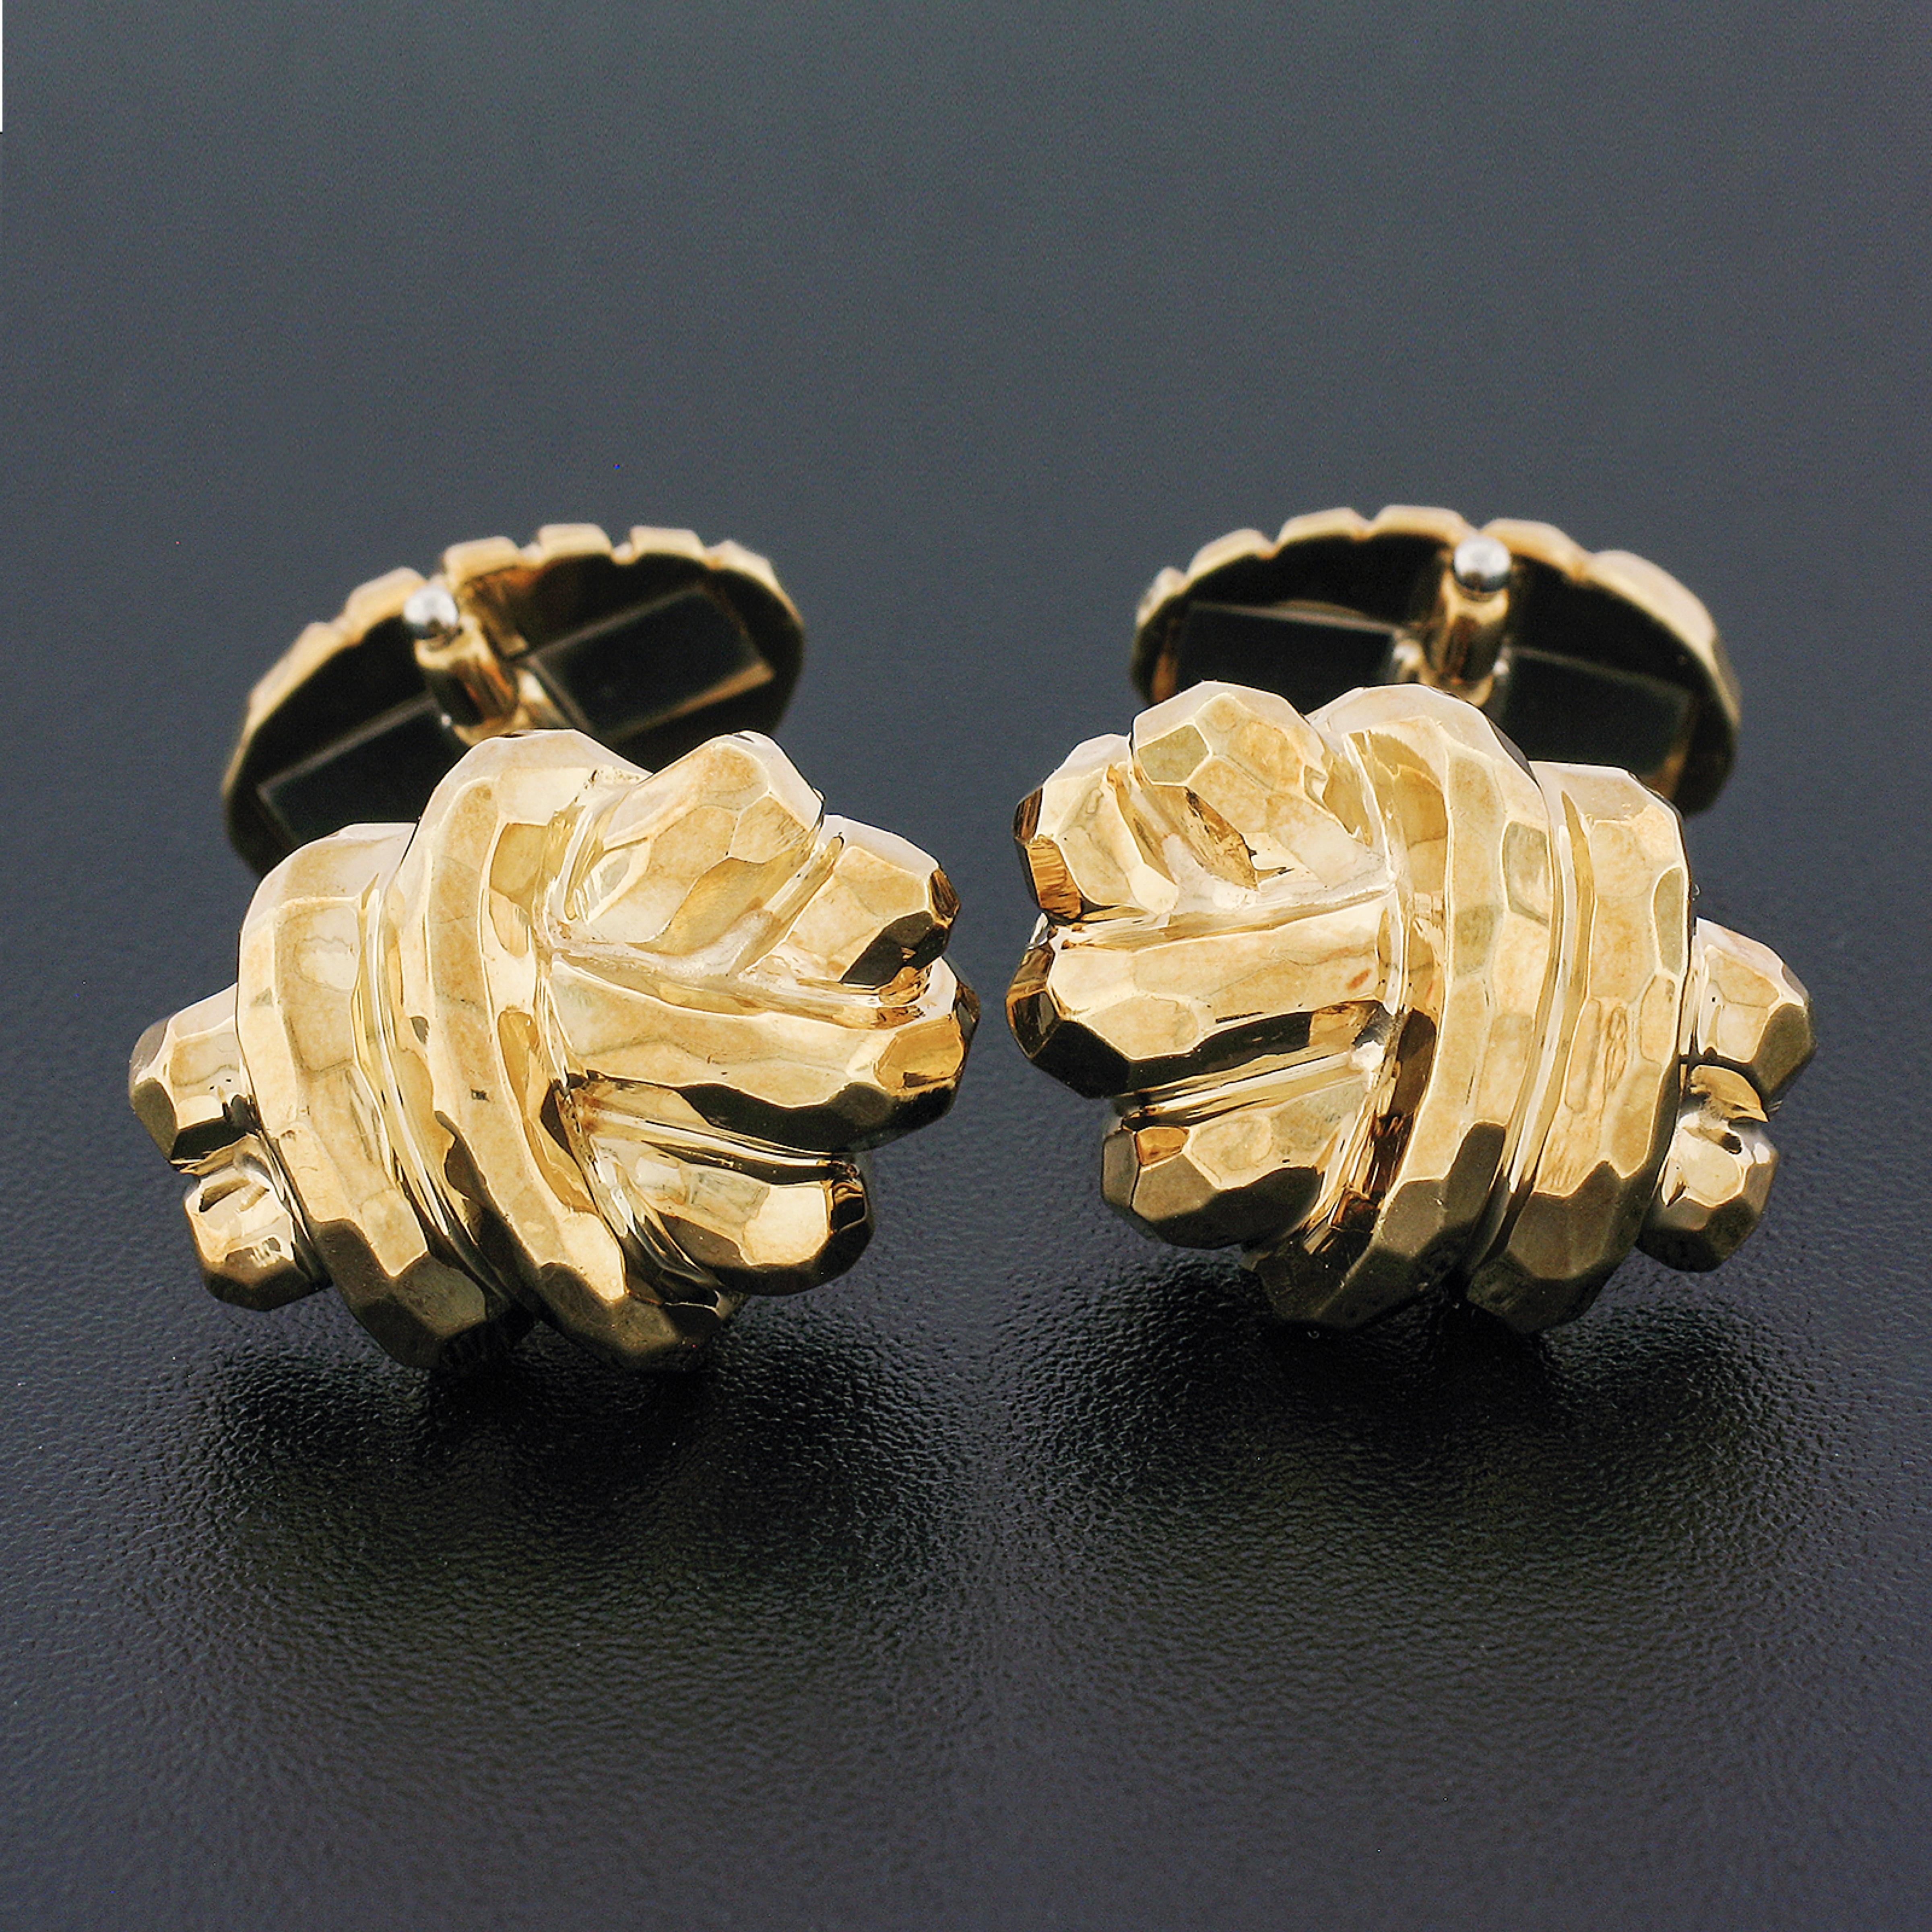 Here we have a classy and refined pair of designer cuff links crafted from solid 18k yellow gold by Henry Dunay. Each of the cuff links is an infinity love knot design that displays a nice hammered finish throughout. This sharp pair of cuff links